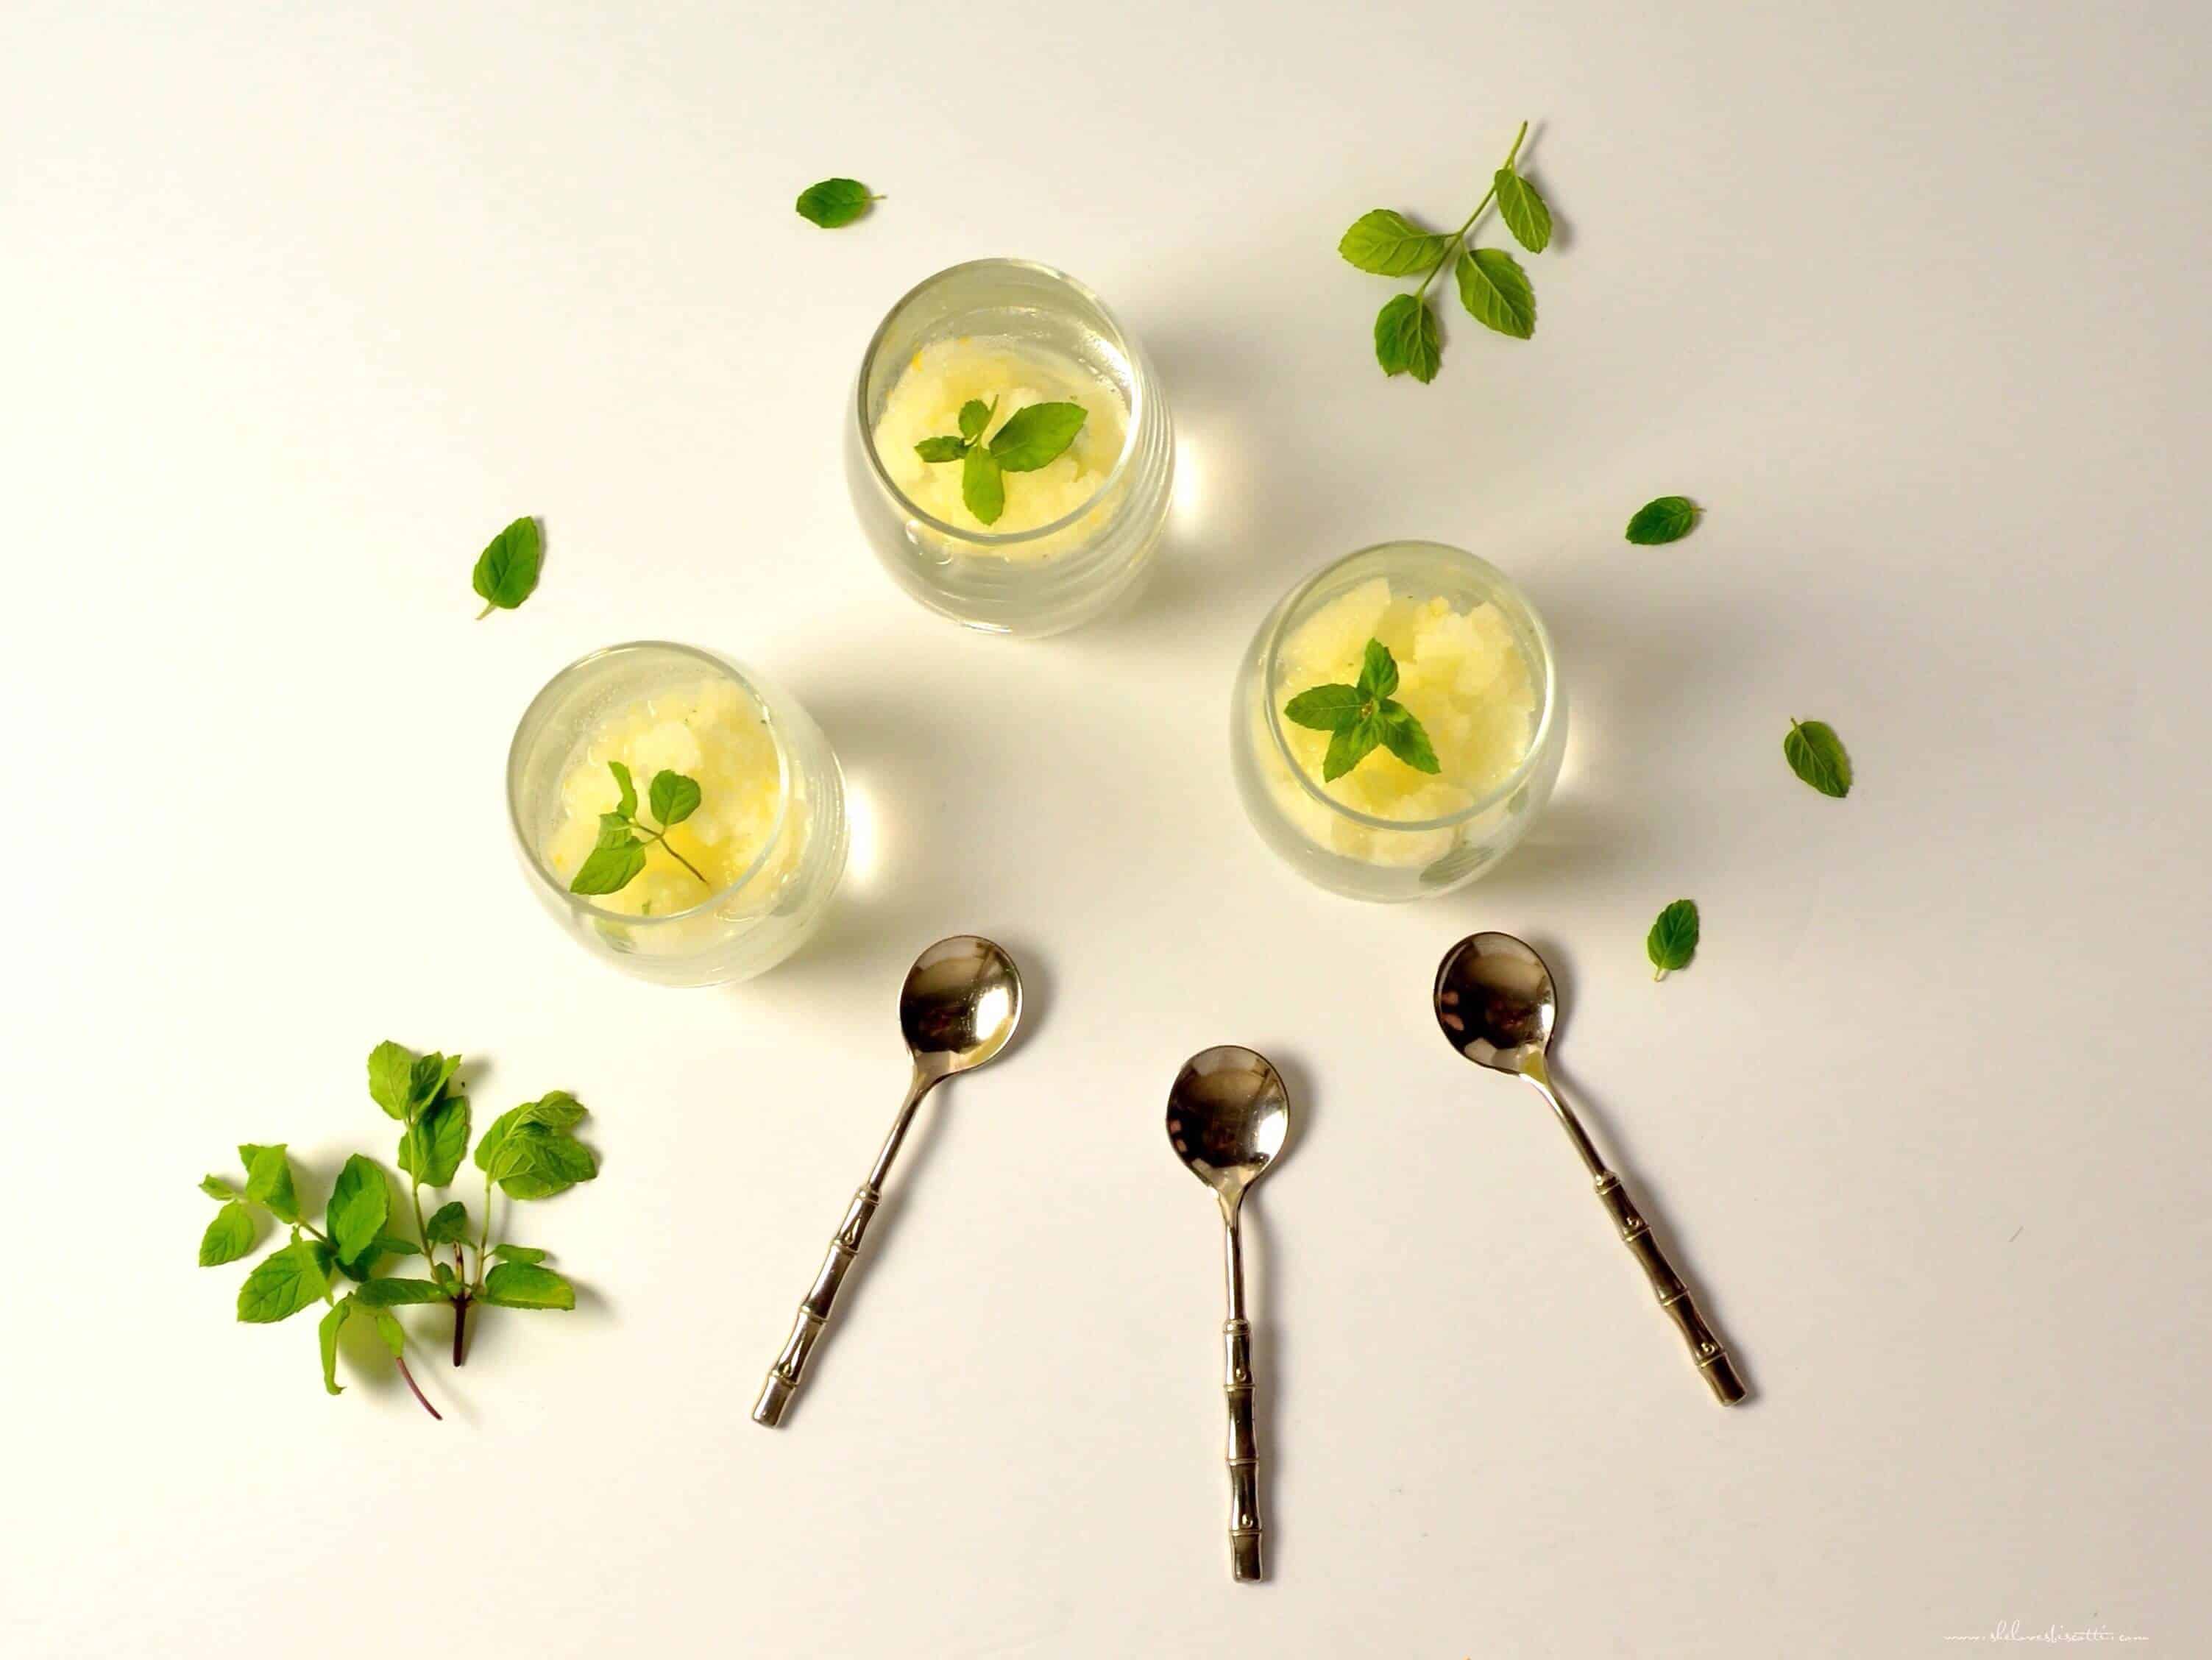 Mint placed decoratively on the serving dishes of Lemon Ice.